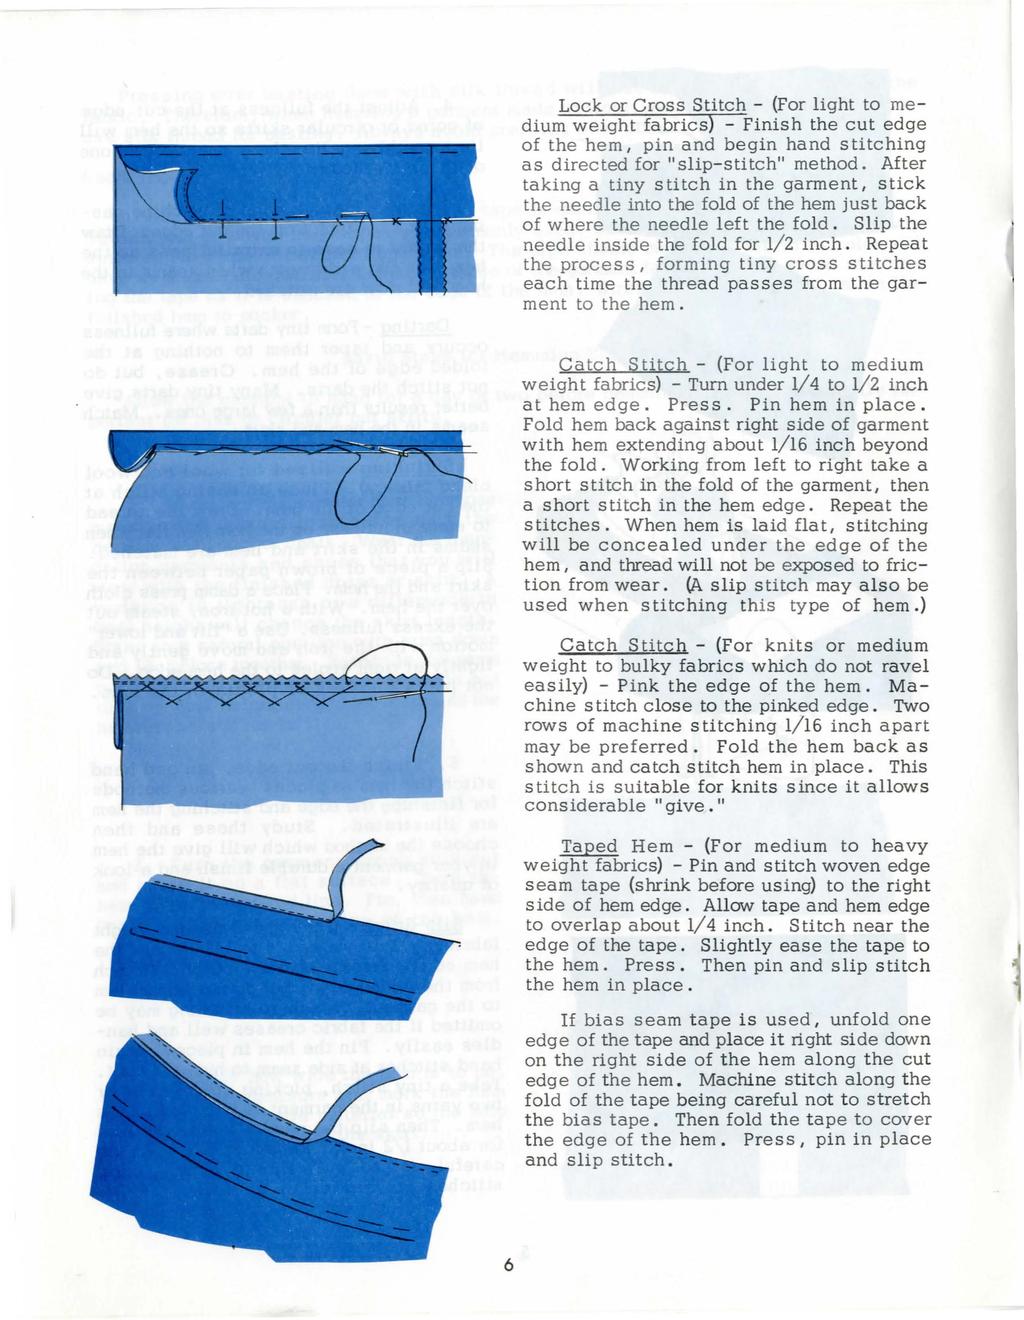 Lock or C ross Stitch - (For light to medium wei gh t fabrics) - Finish the cut edge of the hem, pin and begin hand stitching as directed for "slip-stitch" method.